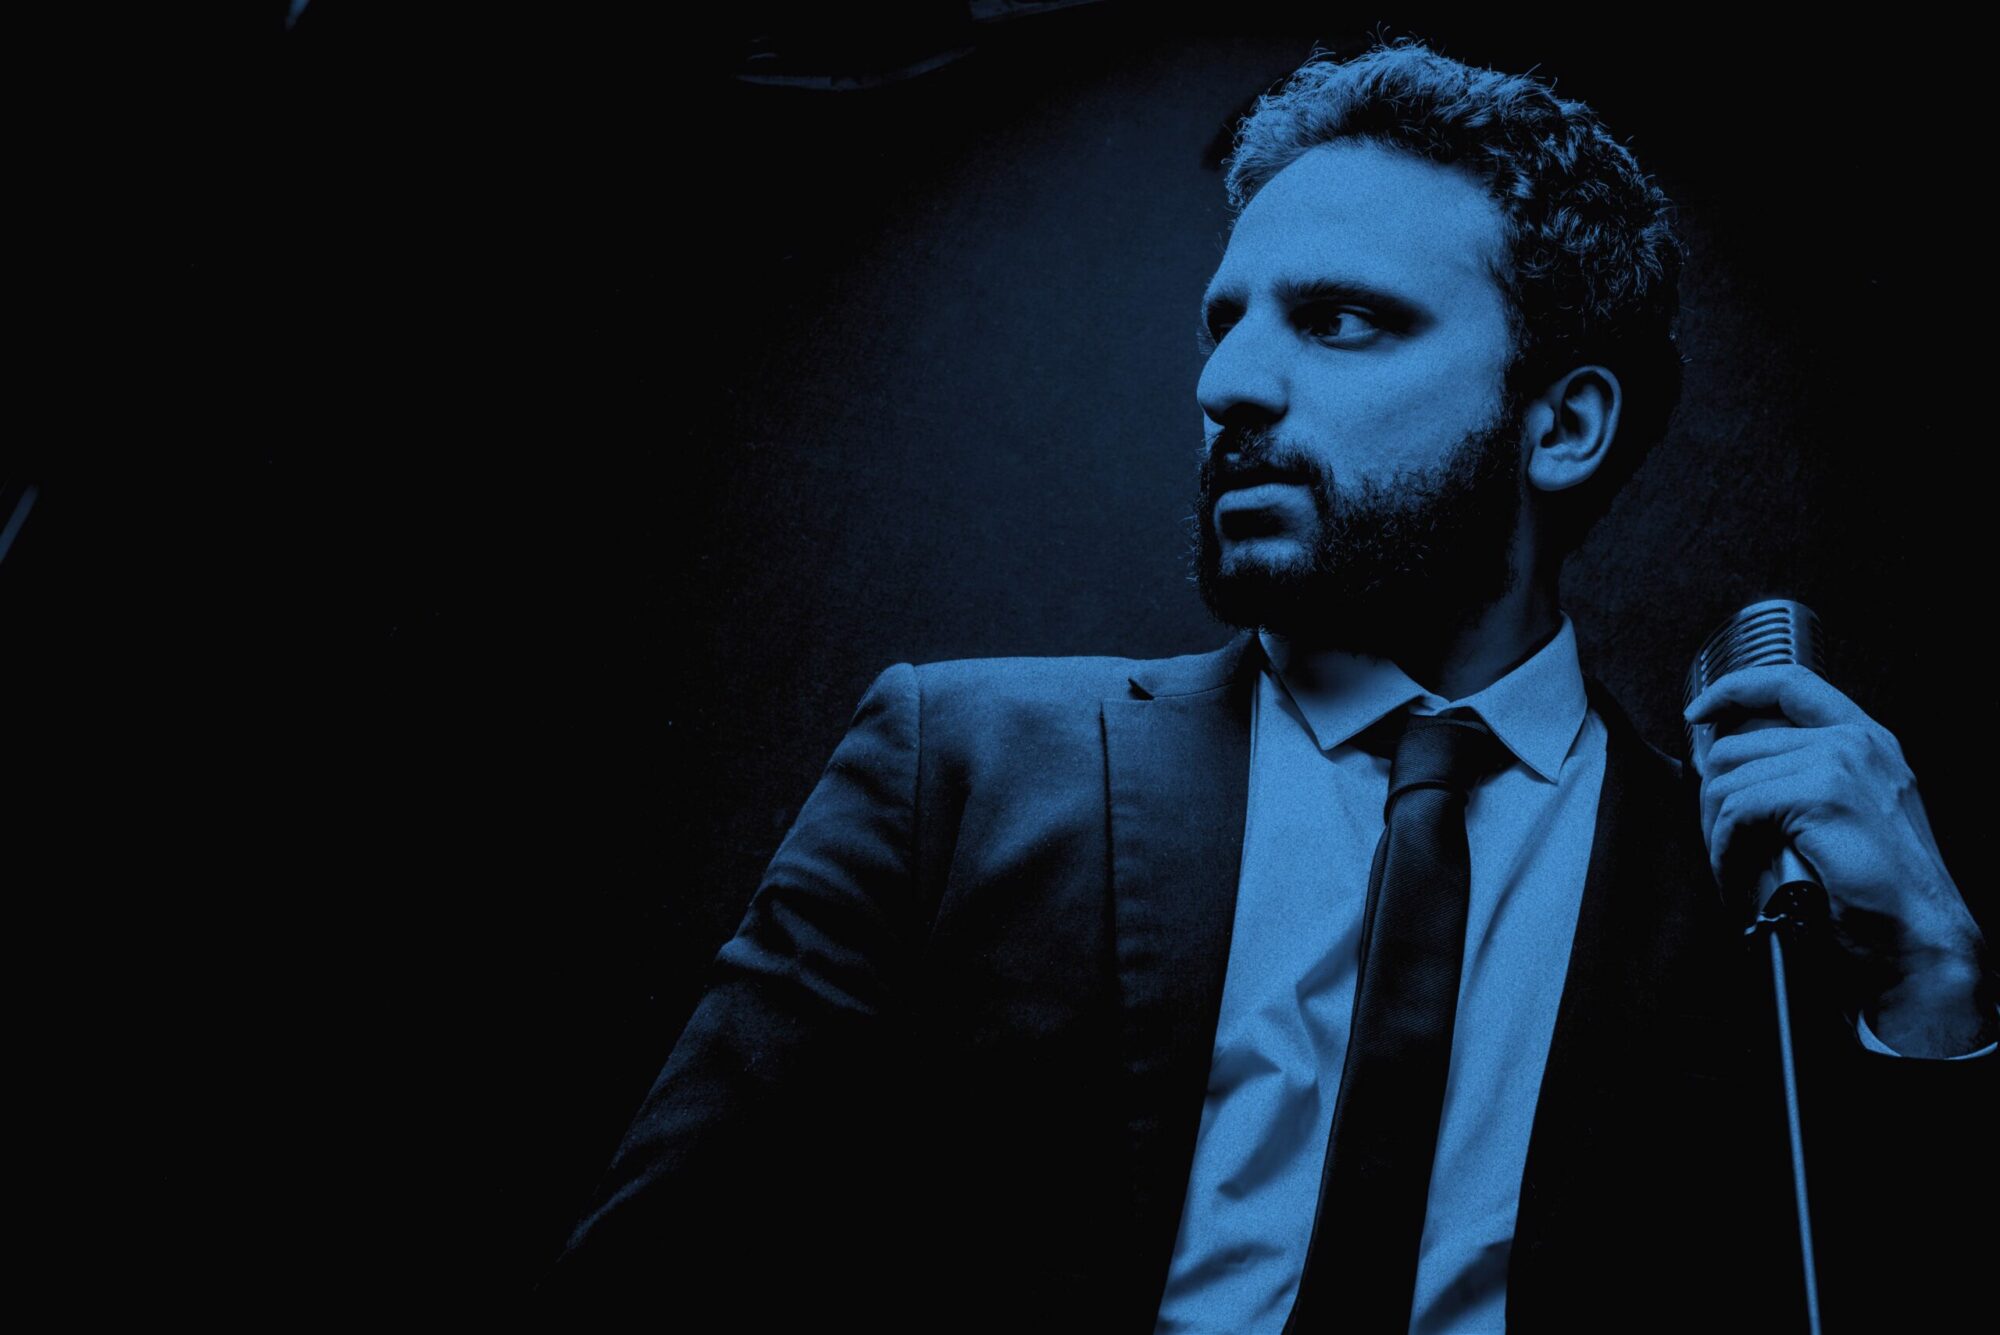 Image name Nish Kumar at Leadmill Sheffield scaled the 18 image from the post Nish Kumar: Nish, Don't Kill My Vibe at Scarborough Spa Theatre, Scarborough in Yorkshire.com.